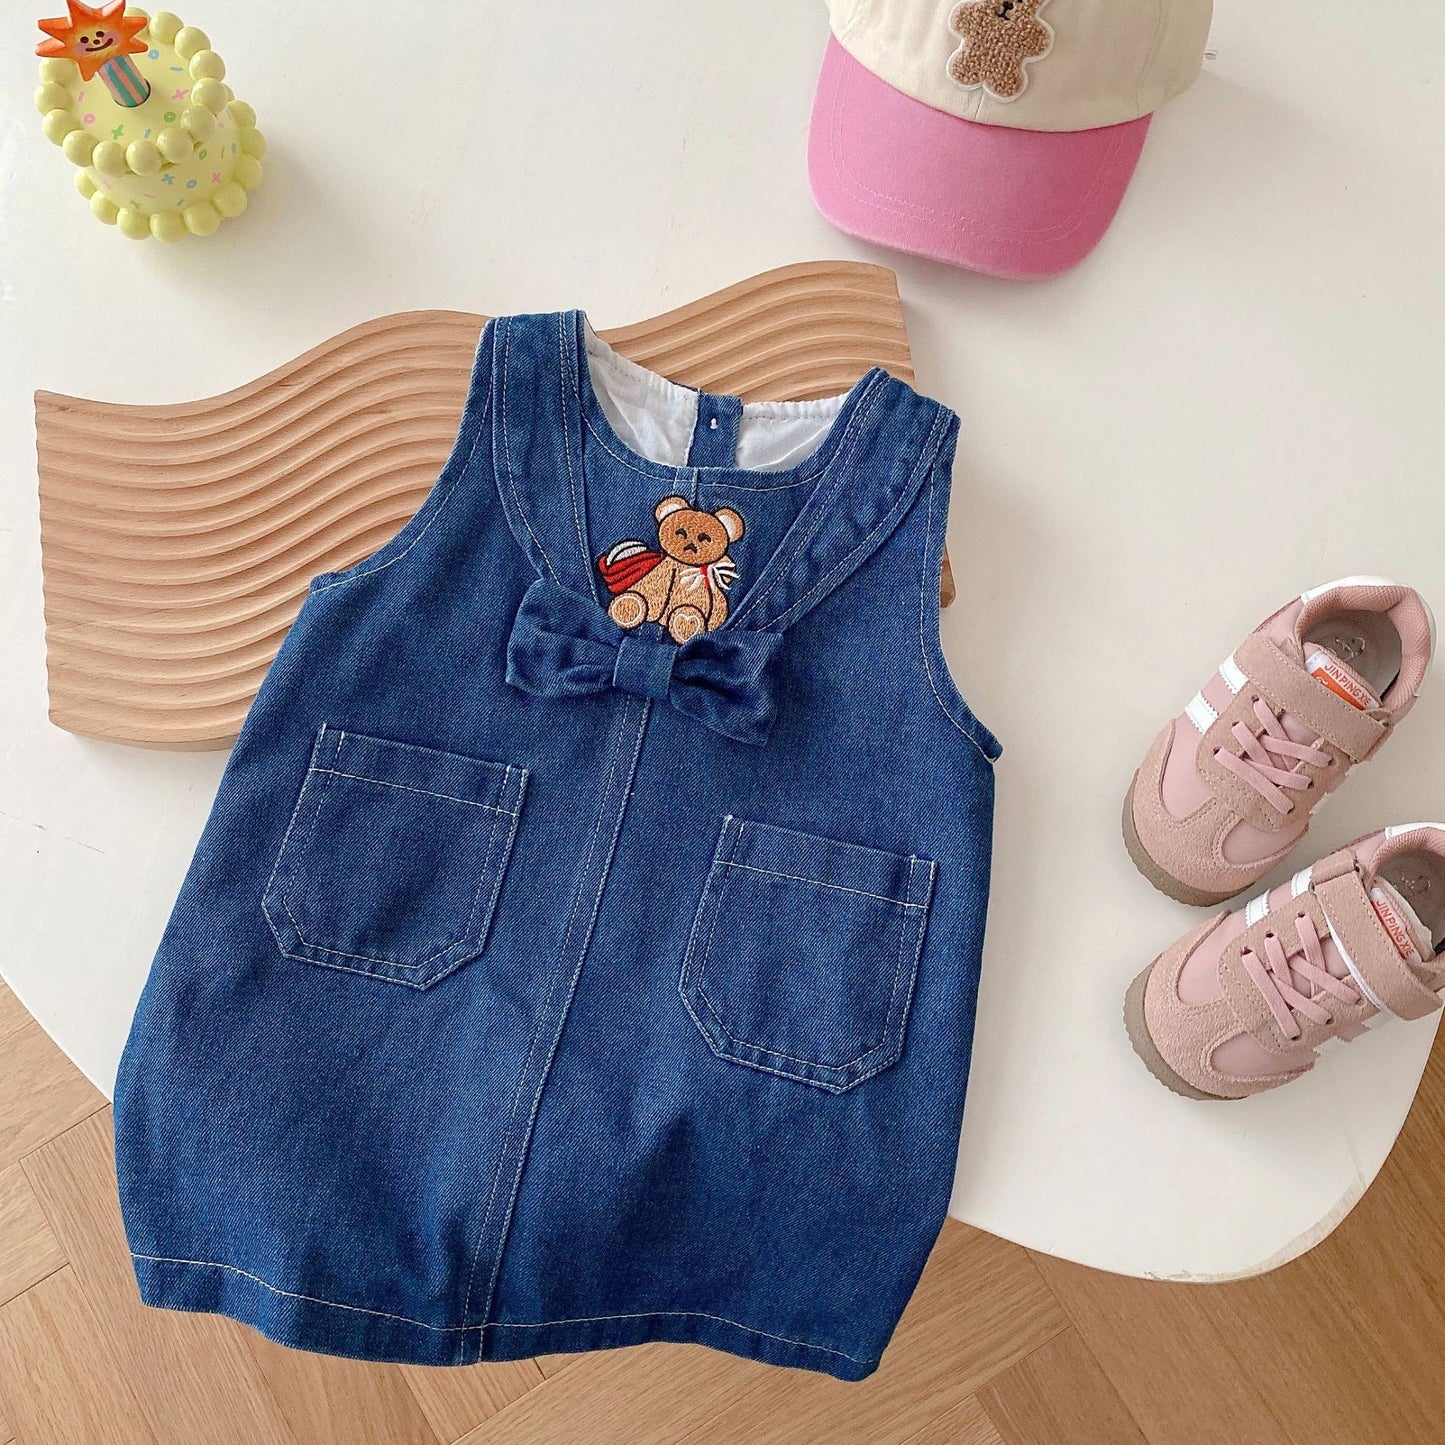 Girls Denim Sundress With 2 Pockets  Matching Embroidery Top